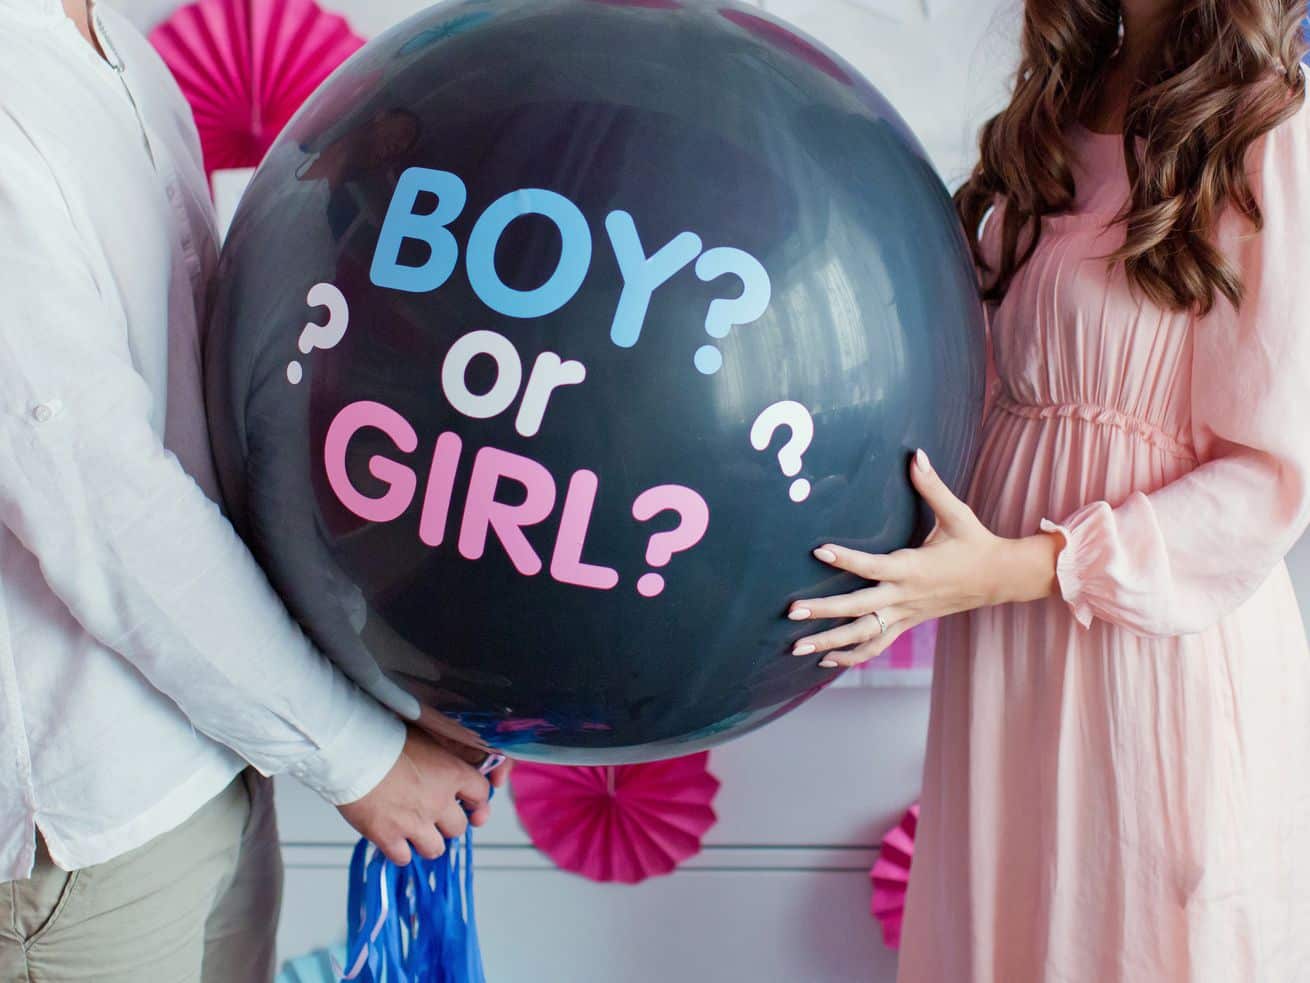 How American parents became obsessed with gender